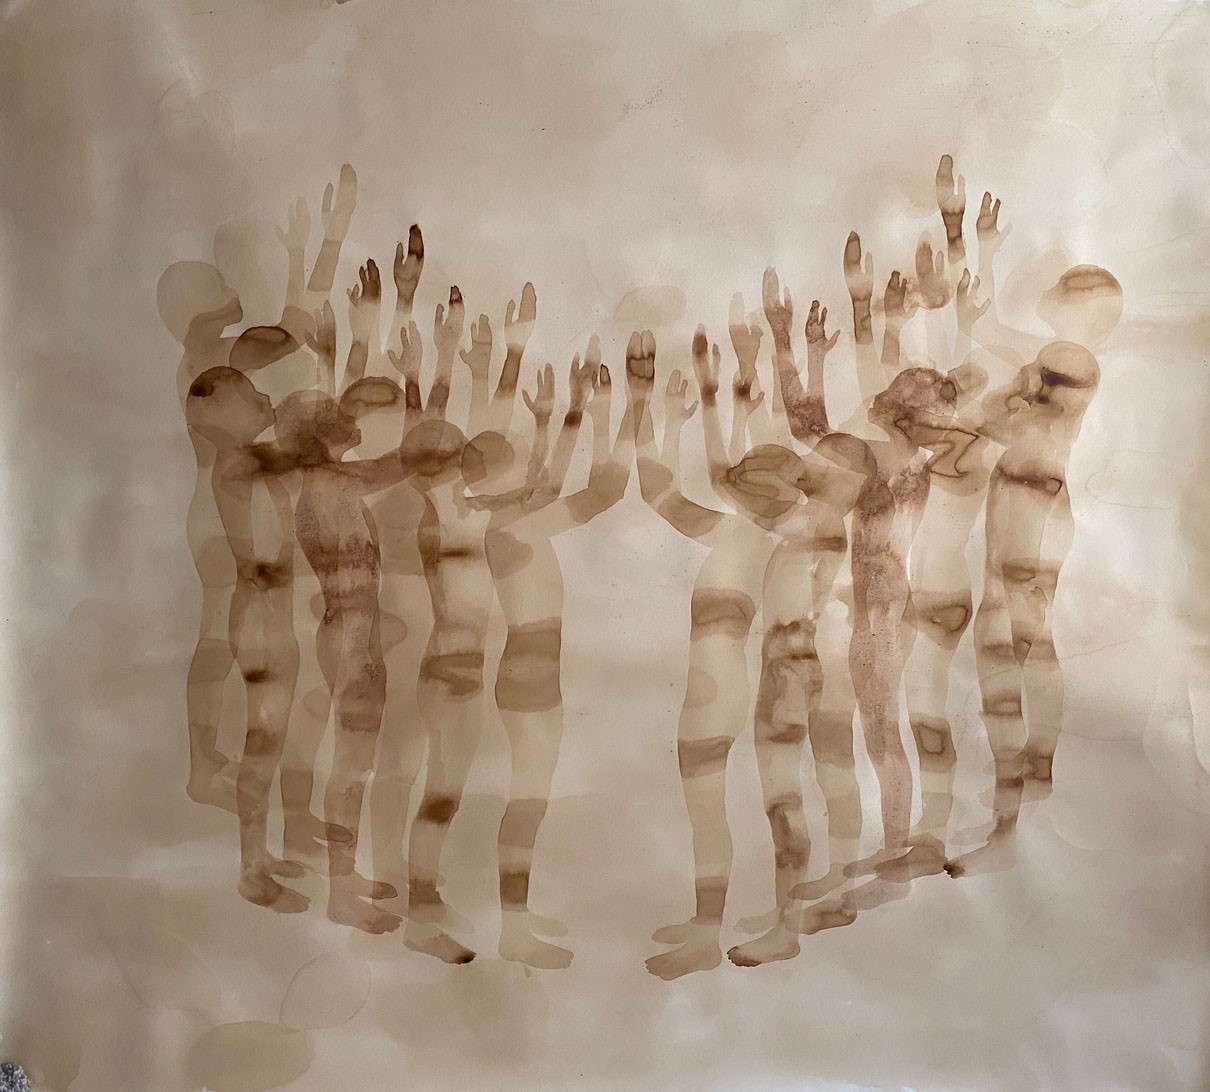 Artist: Hira Noor <br>Marked Sinners <br>Medium: Tea on paper   <br> Size: 6.7ft by 5.8ft